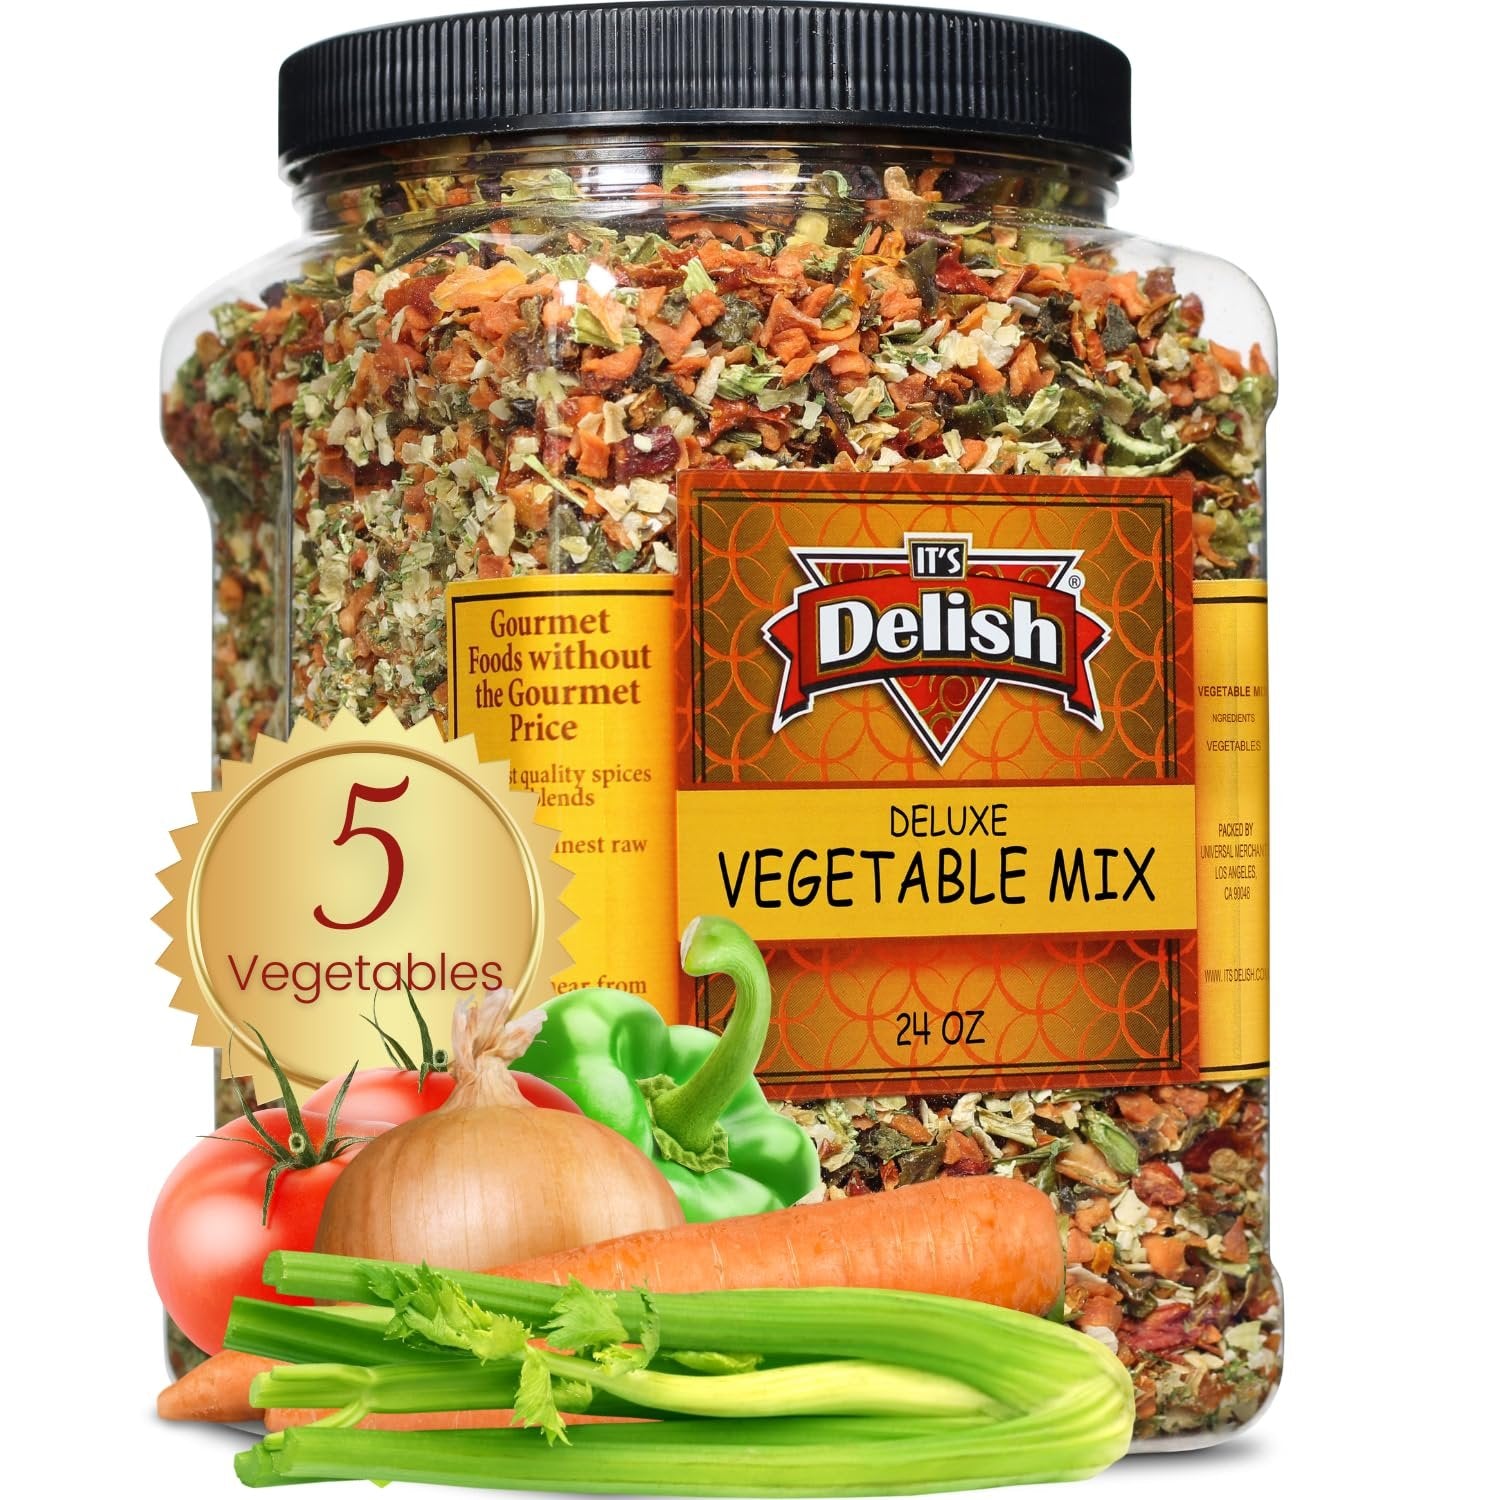 Deluxe Dried Vegetable Soup Mix by Its Delish, 4 lb Restaurant Gallon Size Jug with Handle | Premium Blend of Dehydrated Vegetables